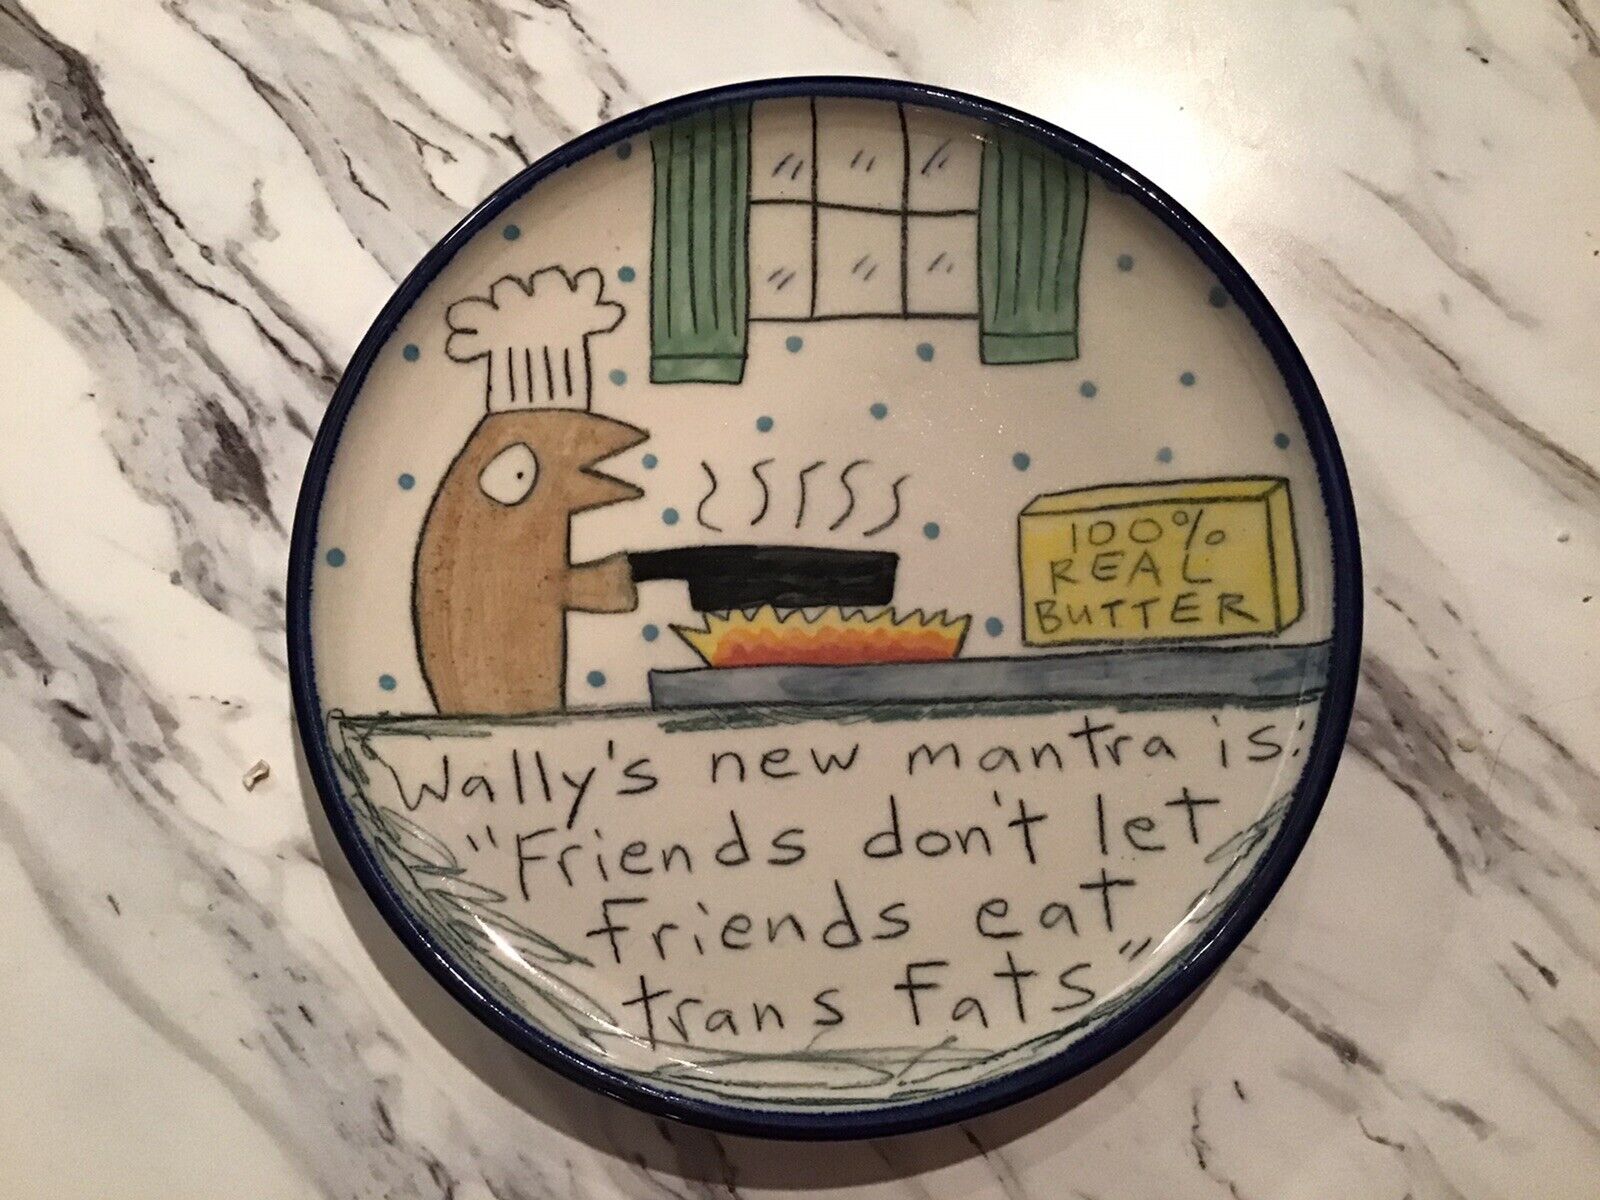 Funny Trans Fats Plate Ceramic Artist 7” Across Wally’s Firends